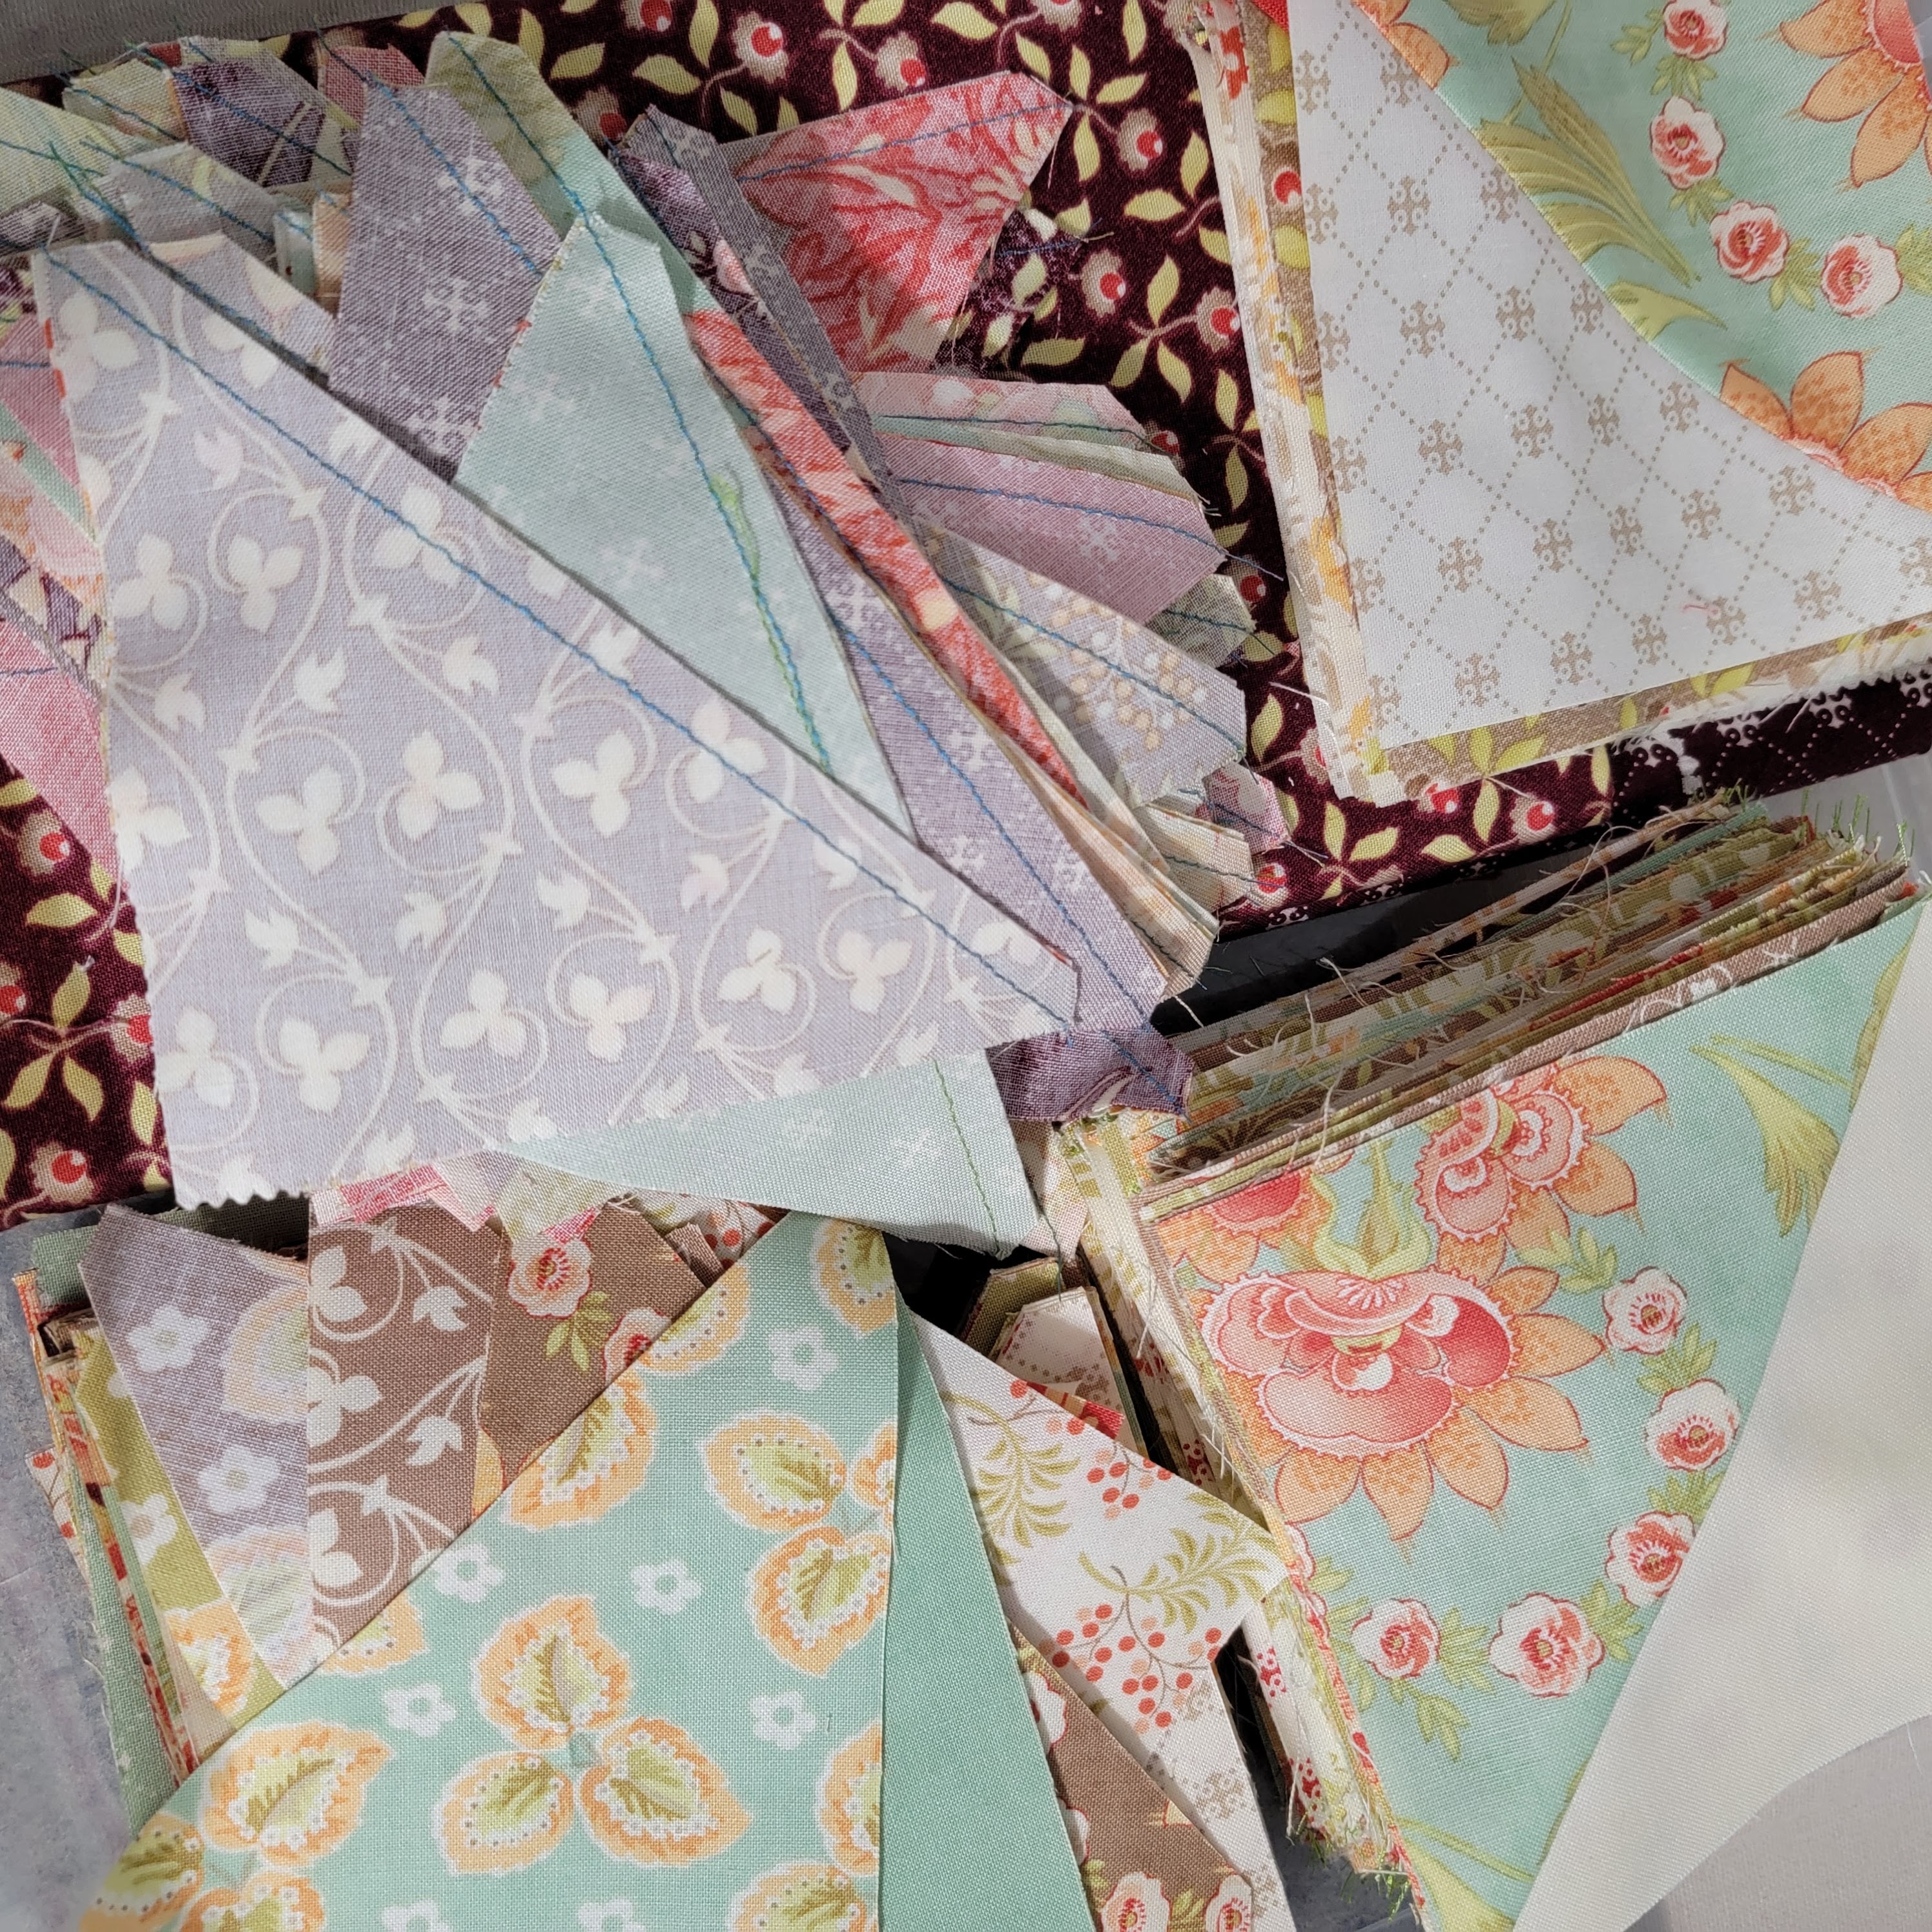 Quilt Books You Should Buy - Patchwork Posse